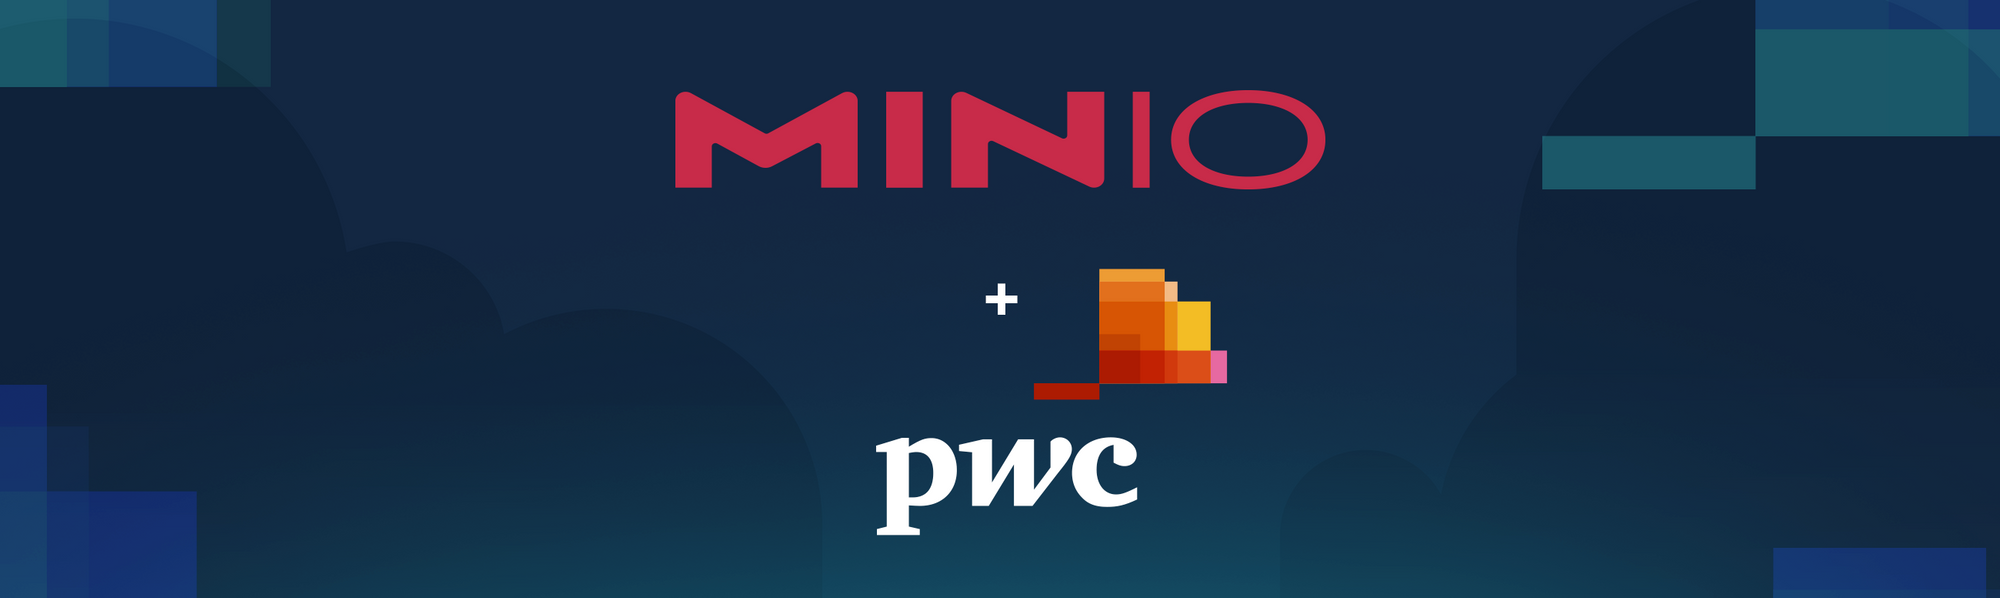 Teaming With PWC on AI/ML Innovation